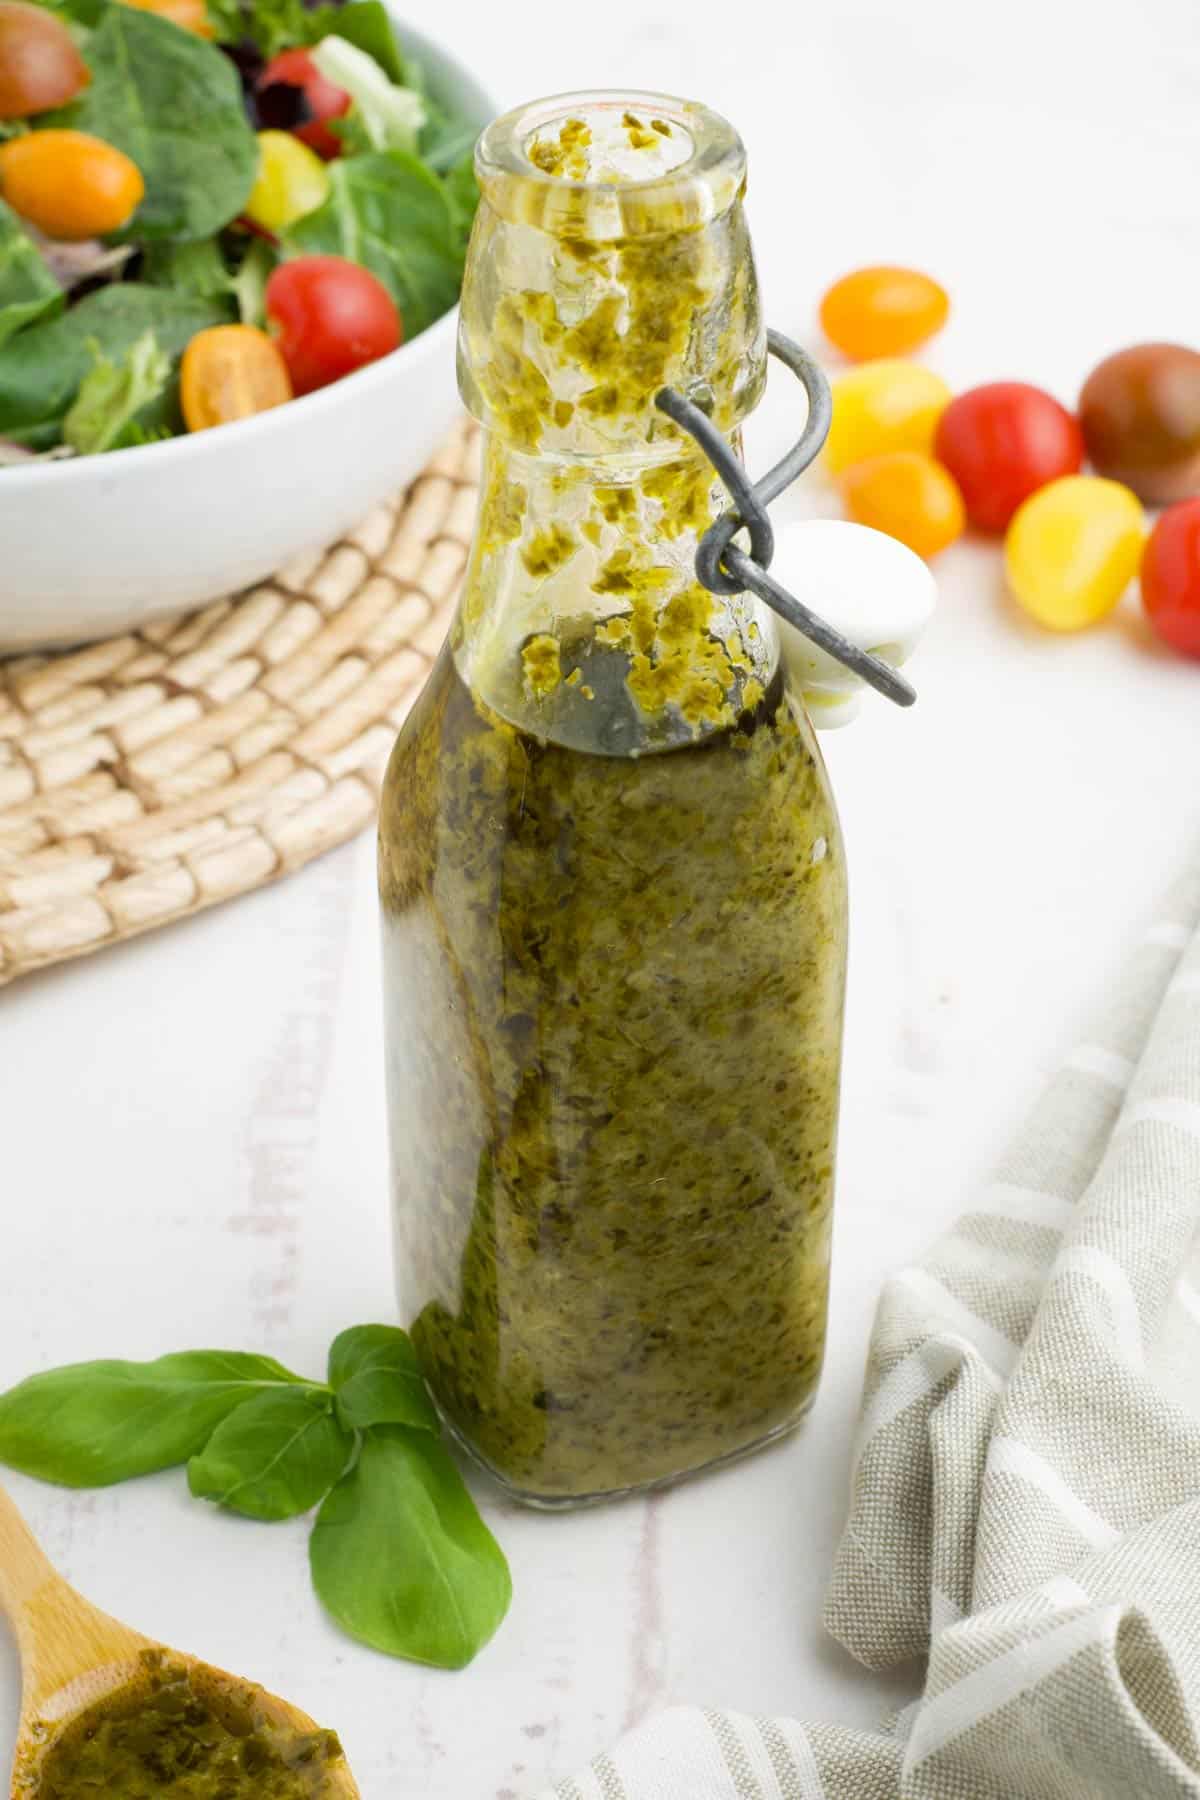 A bottle of pesto salad dressing on the table in front of a bowl of salad.